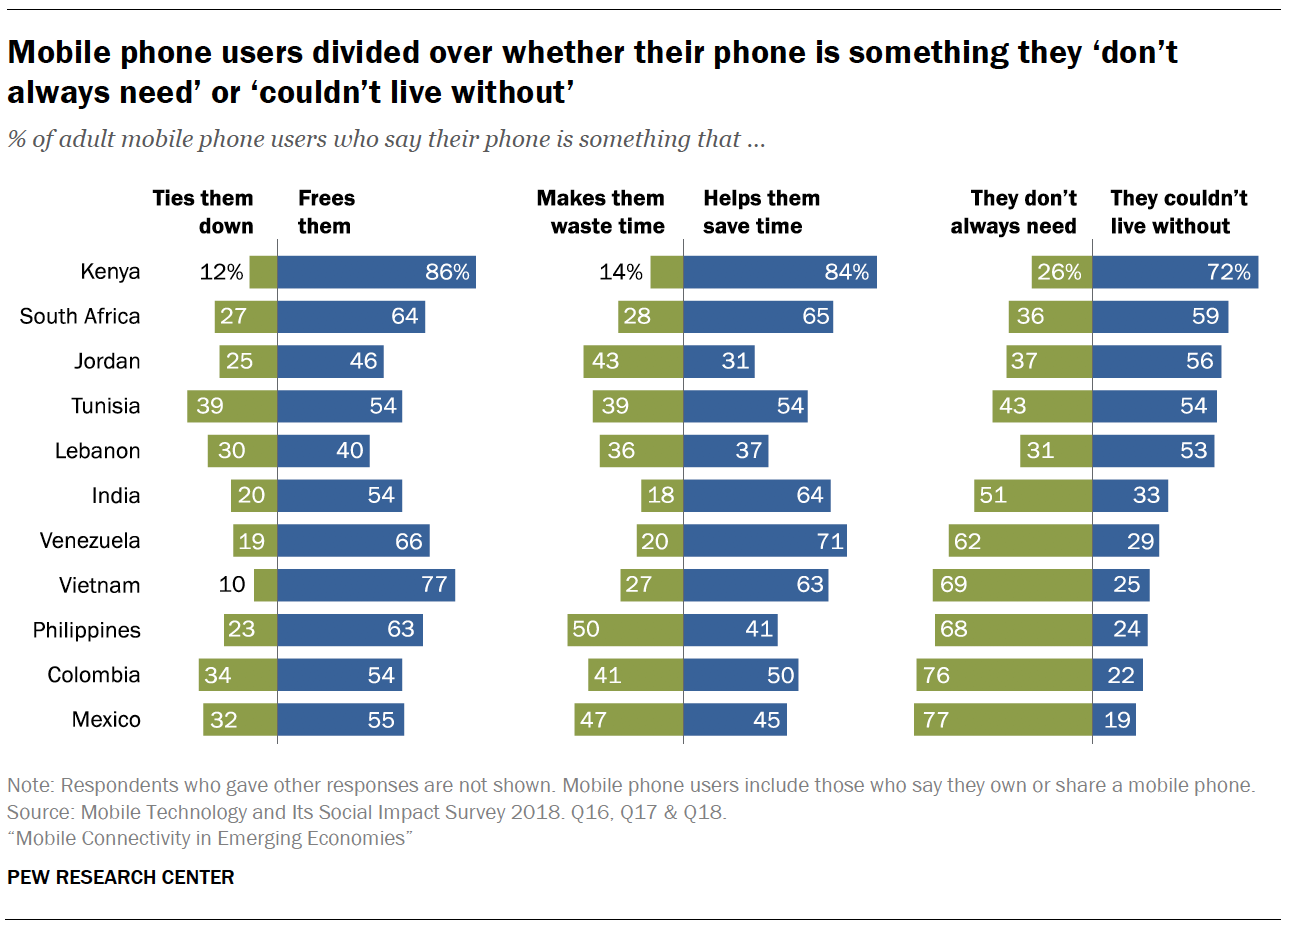 Mobile phone users divided over whether their phone is something they 'don't always need' or 'couldn't live without'